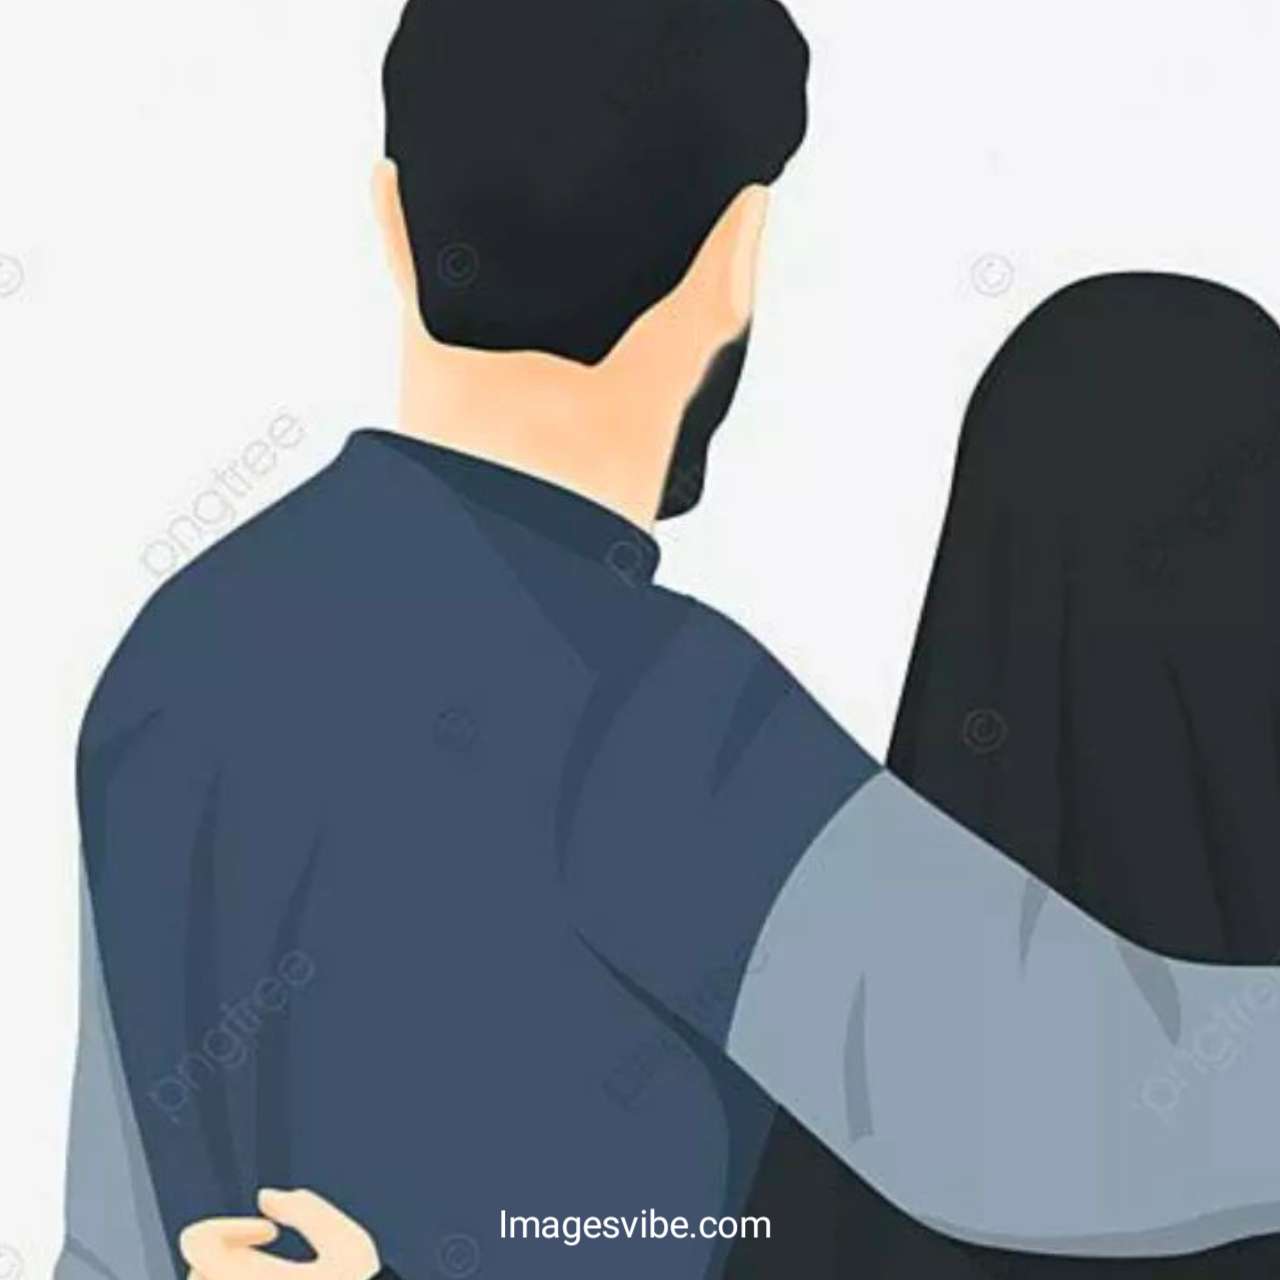 Best 30+ Cute Islamic Couples Images HD Download In 2023 - Images Vibe